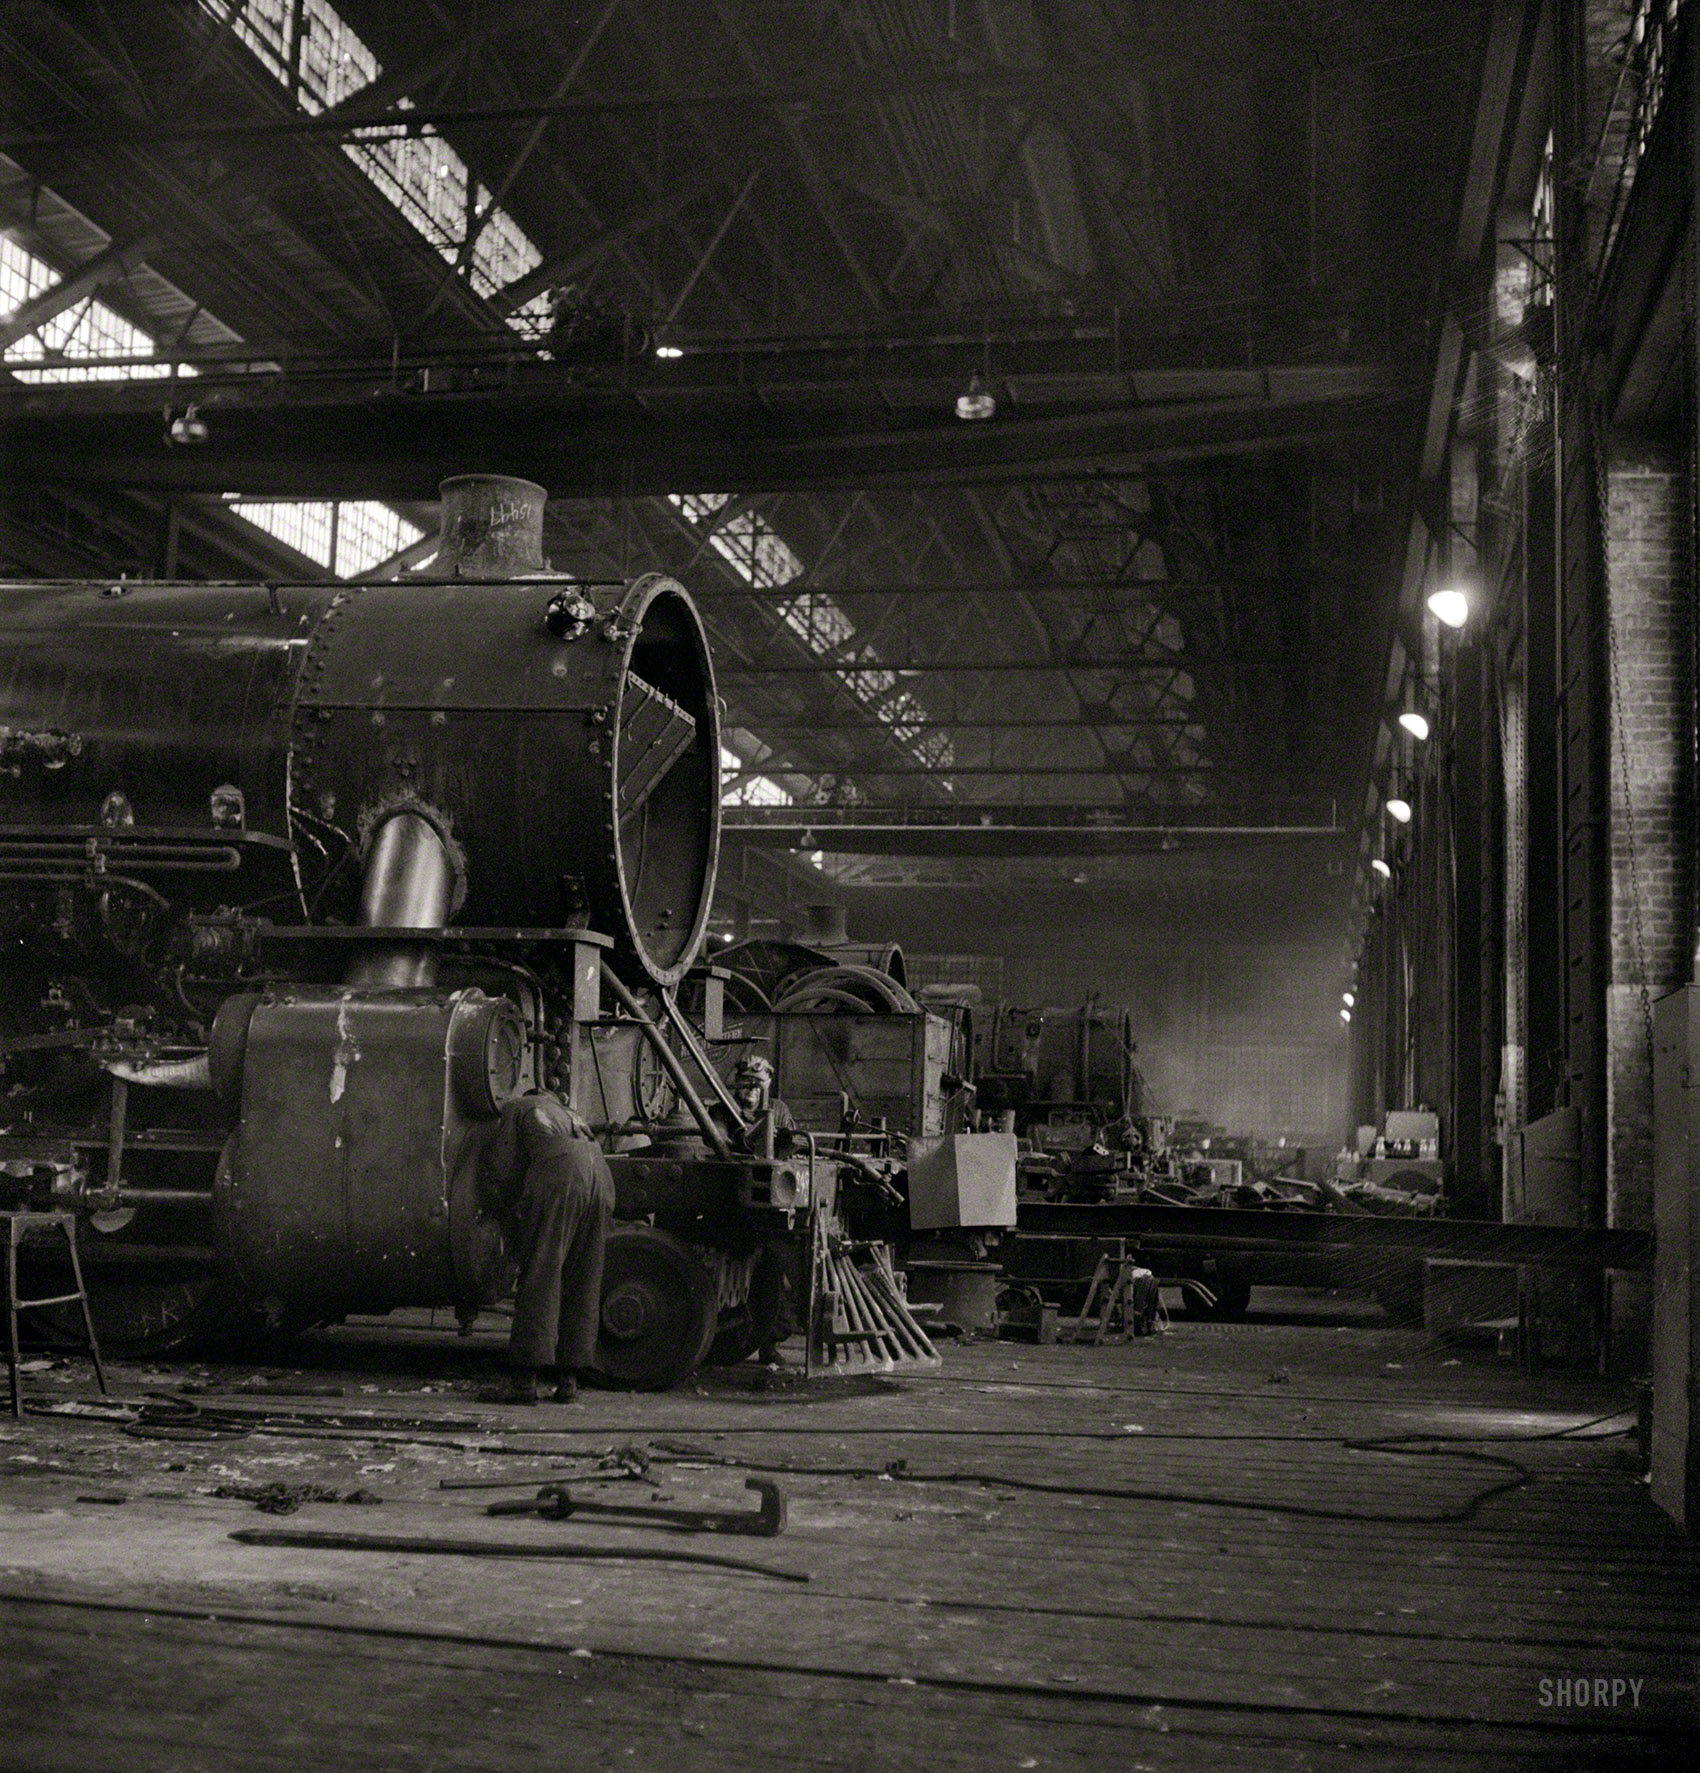 December 1942. "Chicago, Illinois. Working on a locomotive at the Chicago & North Western Railroad repair shops." Photo by Jack Delano. View full size.